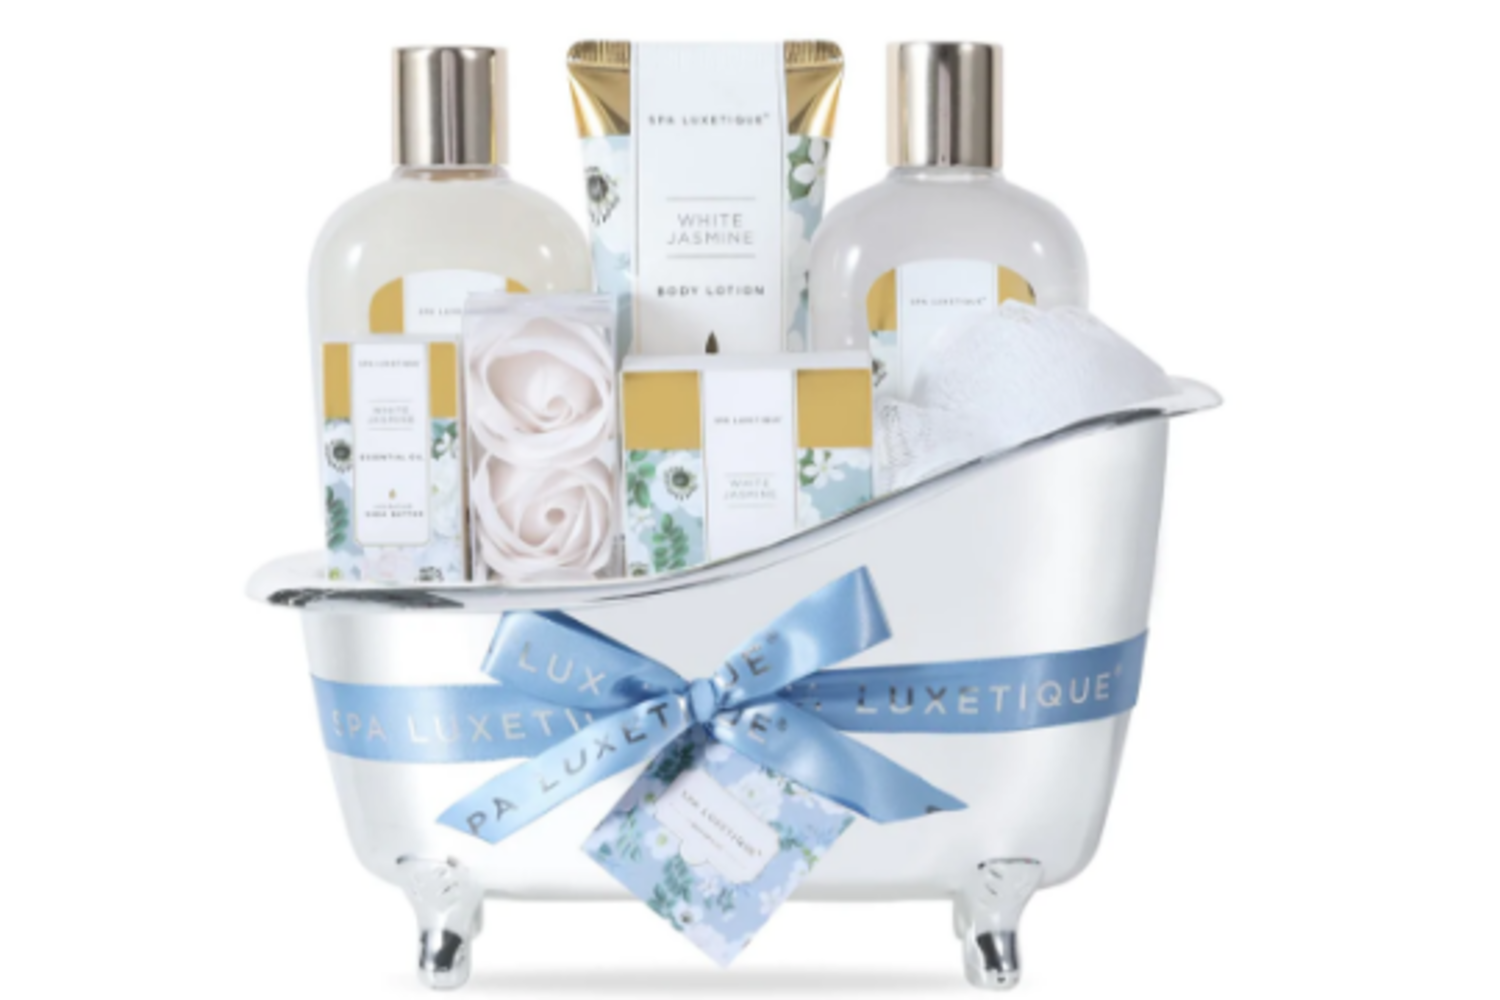 BRAND NEW LUXURY GIFT SETS IN TRADE & PALLET LOTS IN VARIOUS DESIGNS, SIZES, STYLES & FRAGRANCES - DELIVERY AVAILABLE